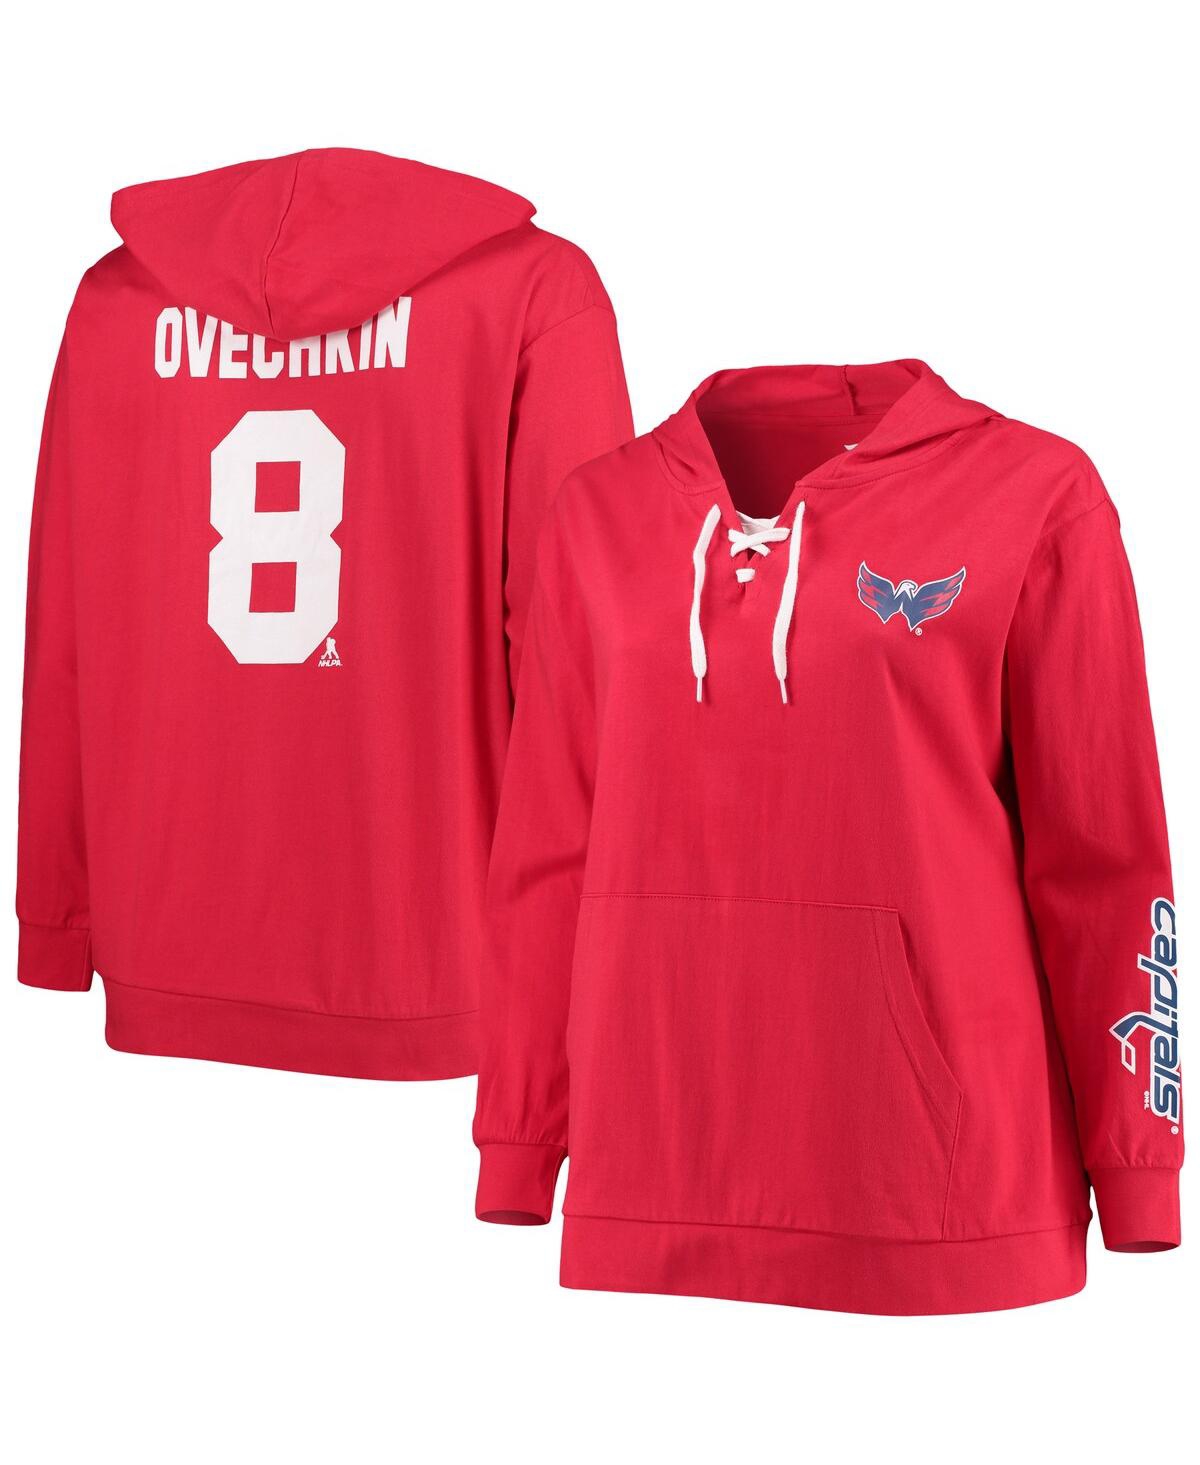 Women's Alexander Ovechkin Red Washington Capitals Plus Size Lace-Up V-Neck Pullover Hoodie - Red